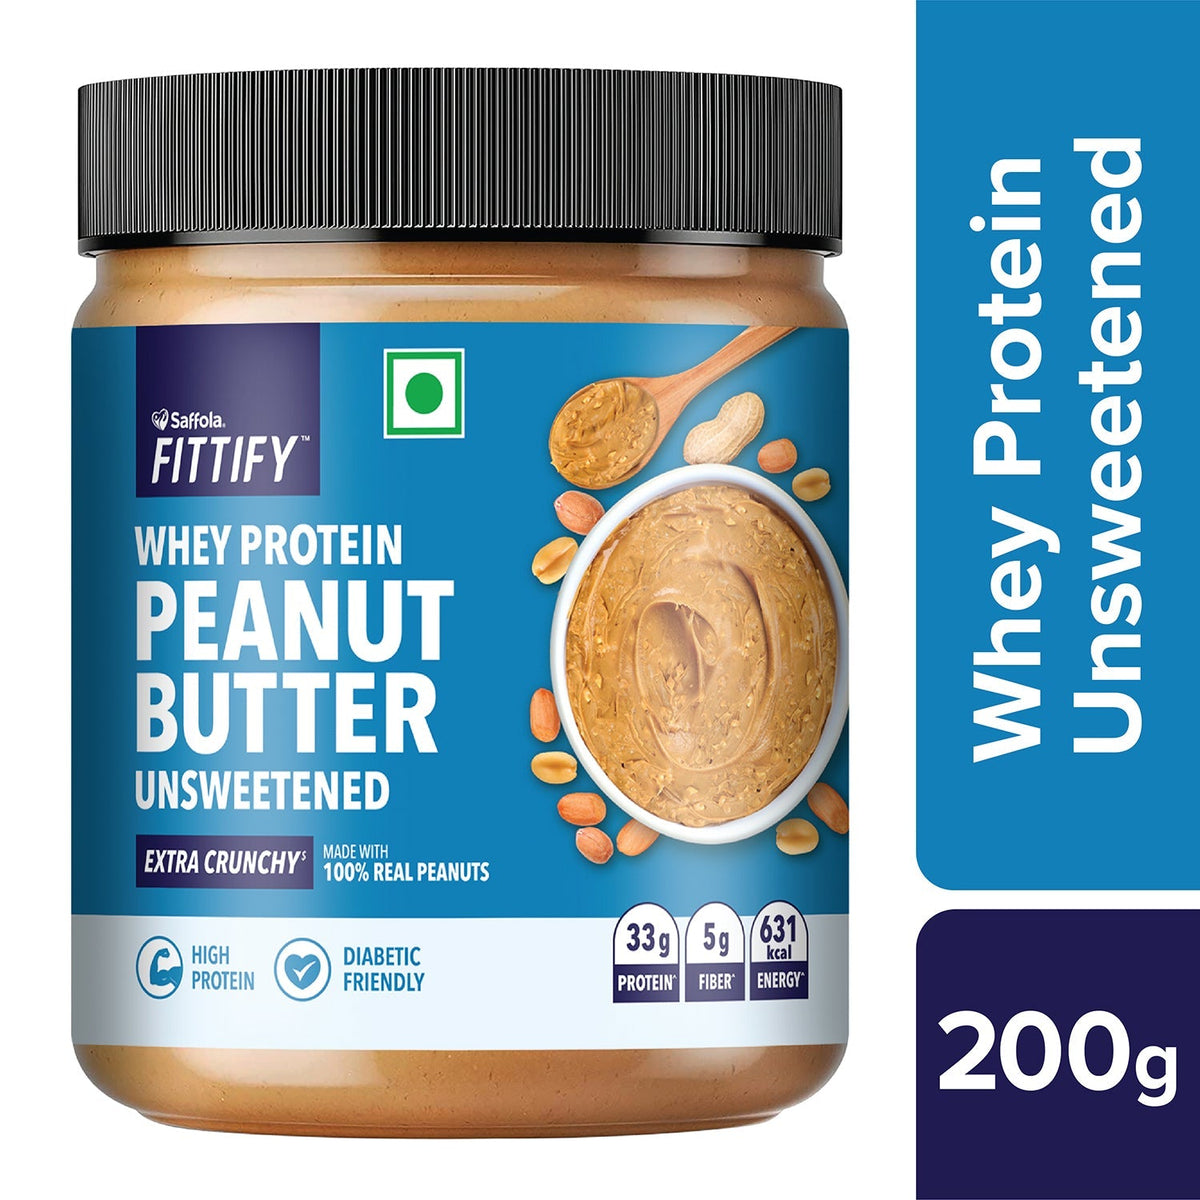 [CRED] Saffola Fittify Whey Protein - Unsweetened - Peanut Butter